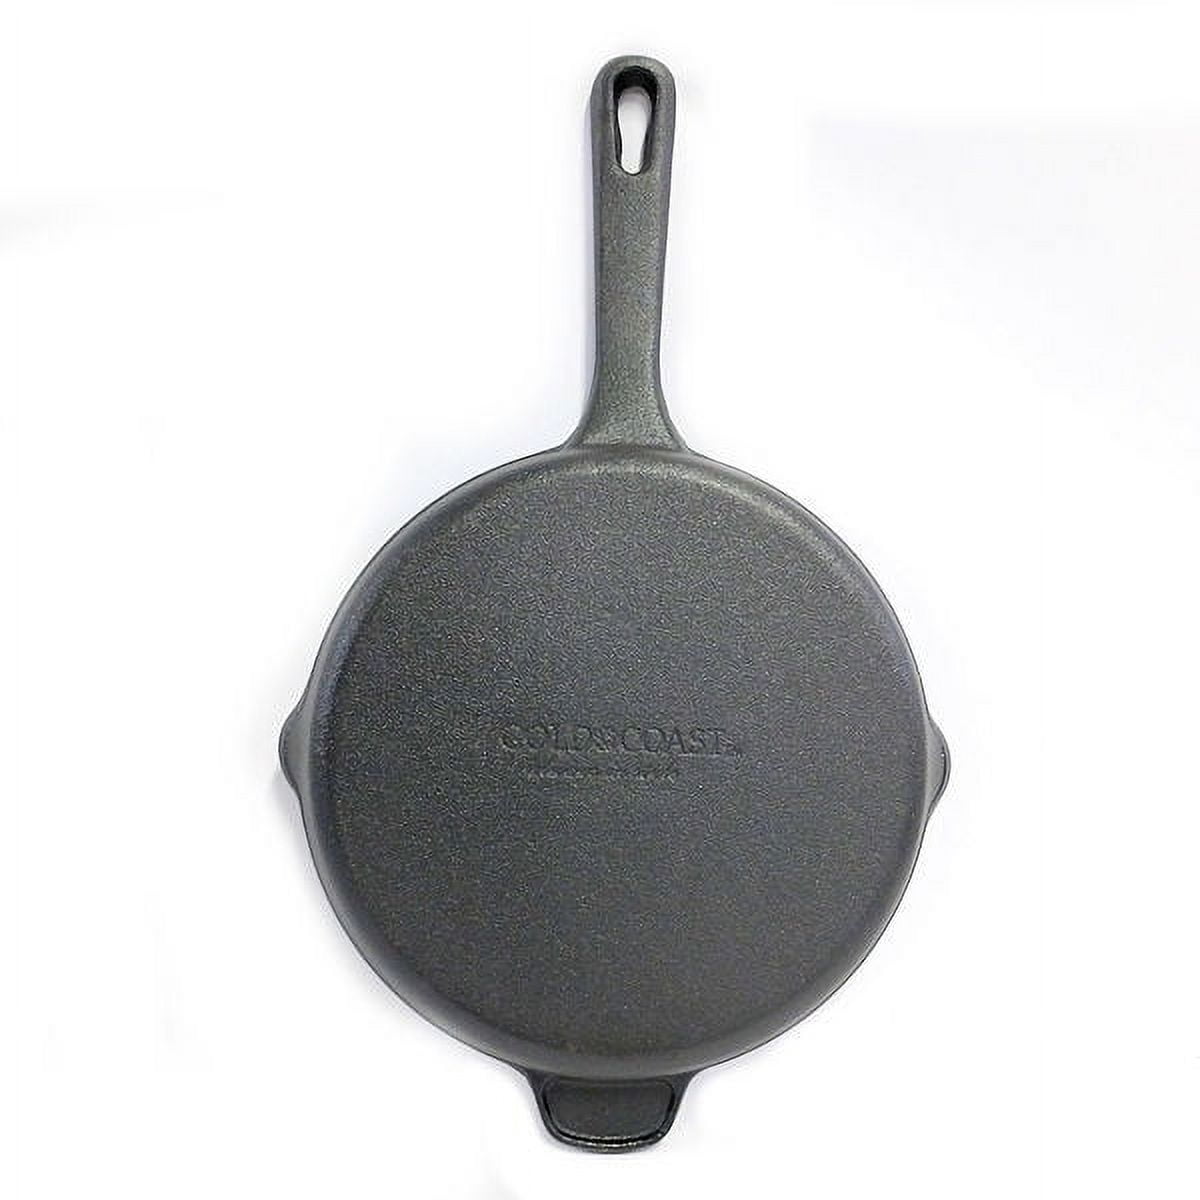 Ouro Gold 9.5 Covered Deep Skillet with Lid and Two Side Handles/Metal  Lids - Bed Bath & Beyond - 35255120